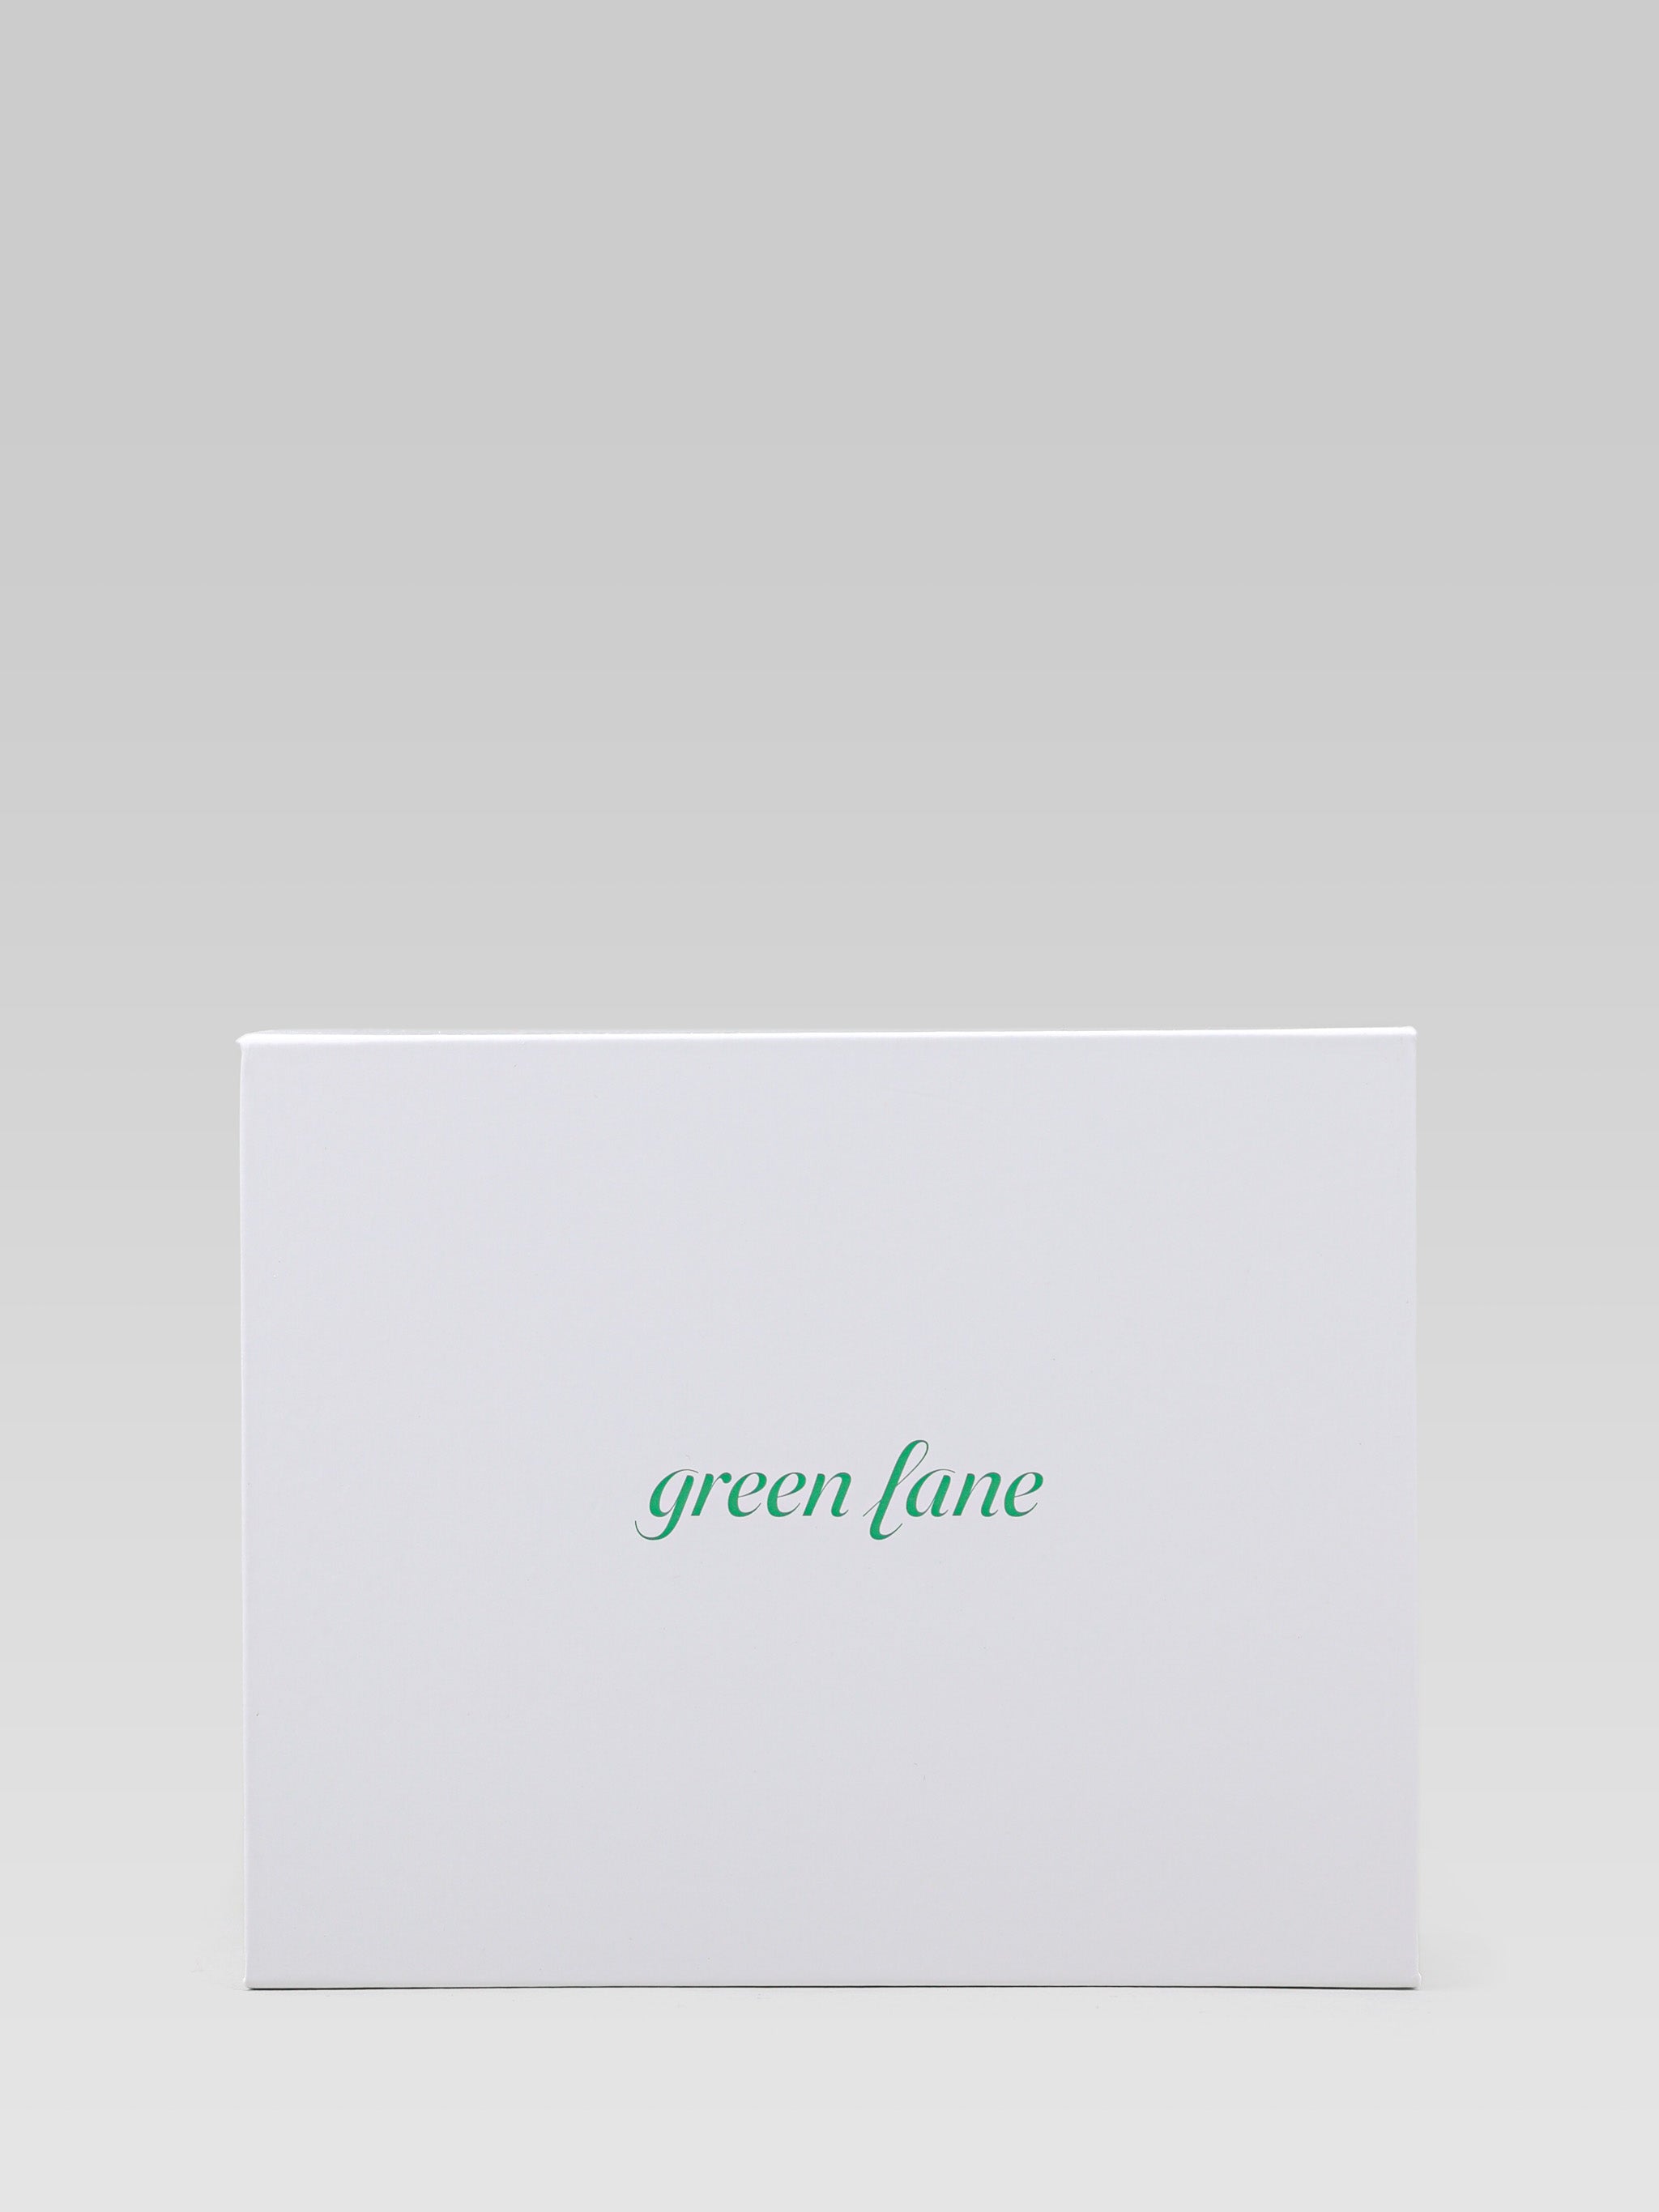 greenlane cupping product packaging